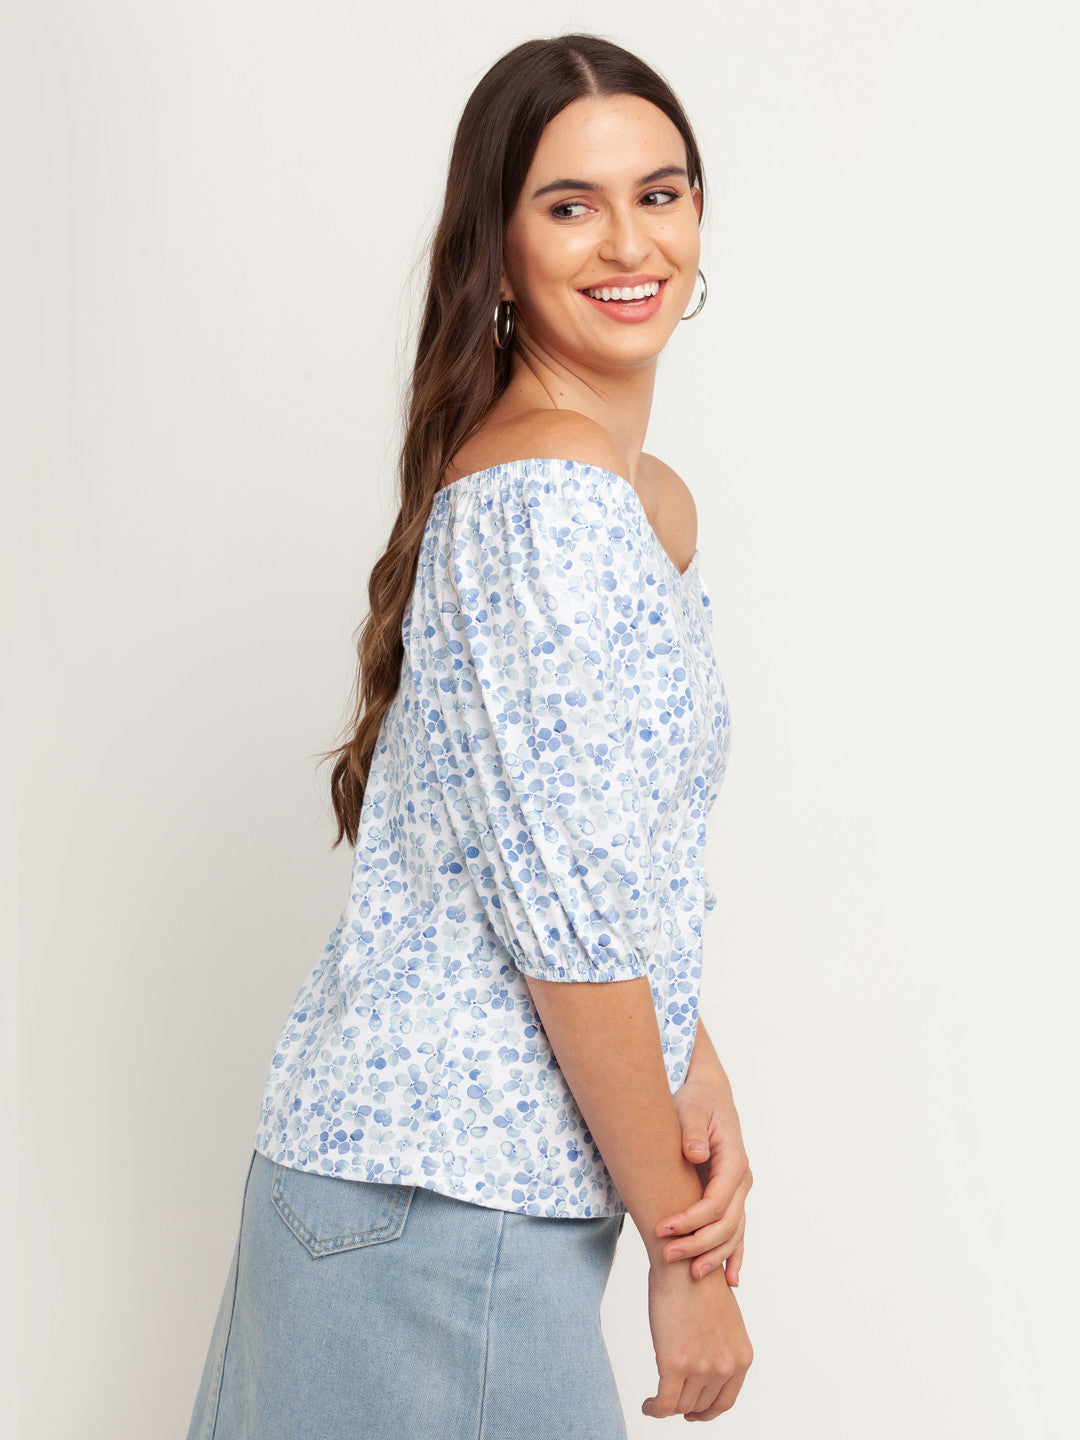 White Solid Short Sleeves Top For Women